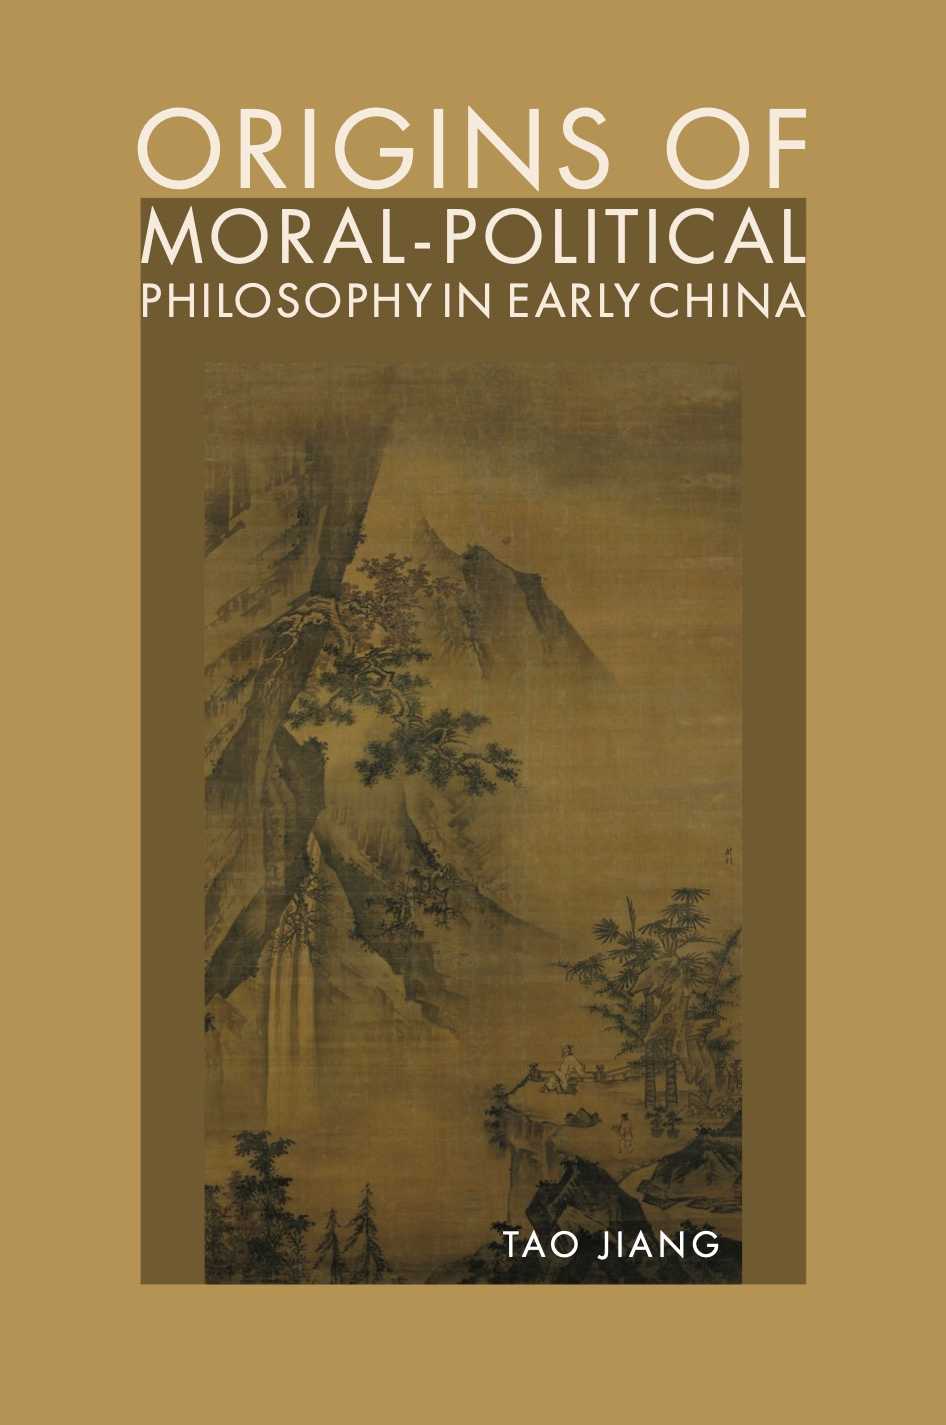 Origins of Moral-Political Philosophy in Early China - Tao Jiang